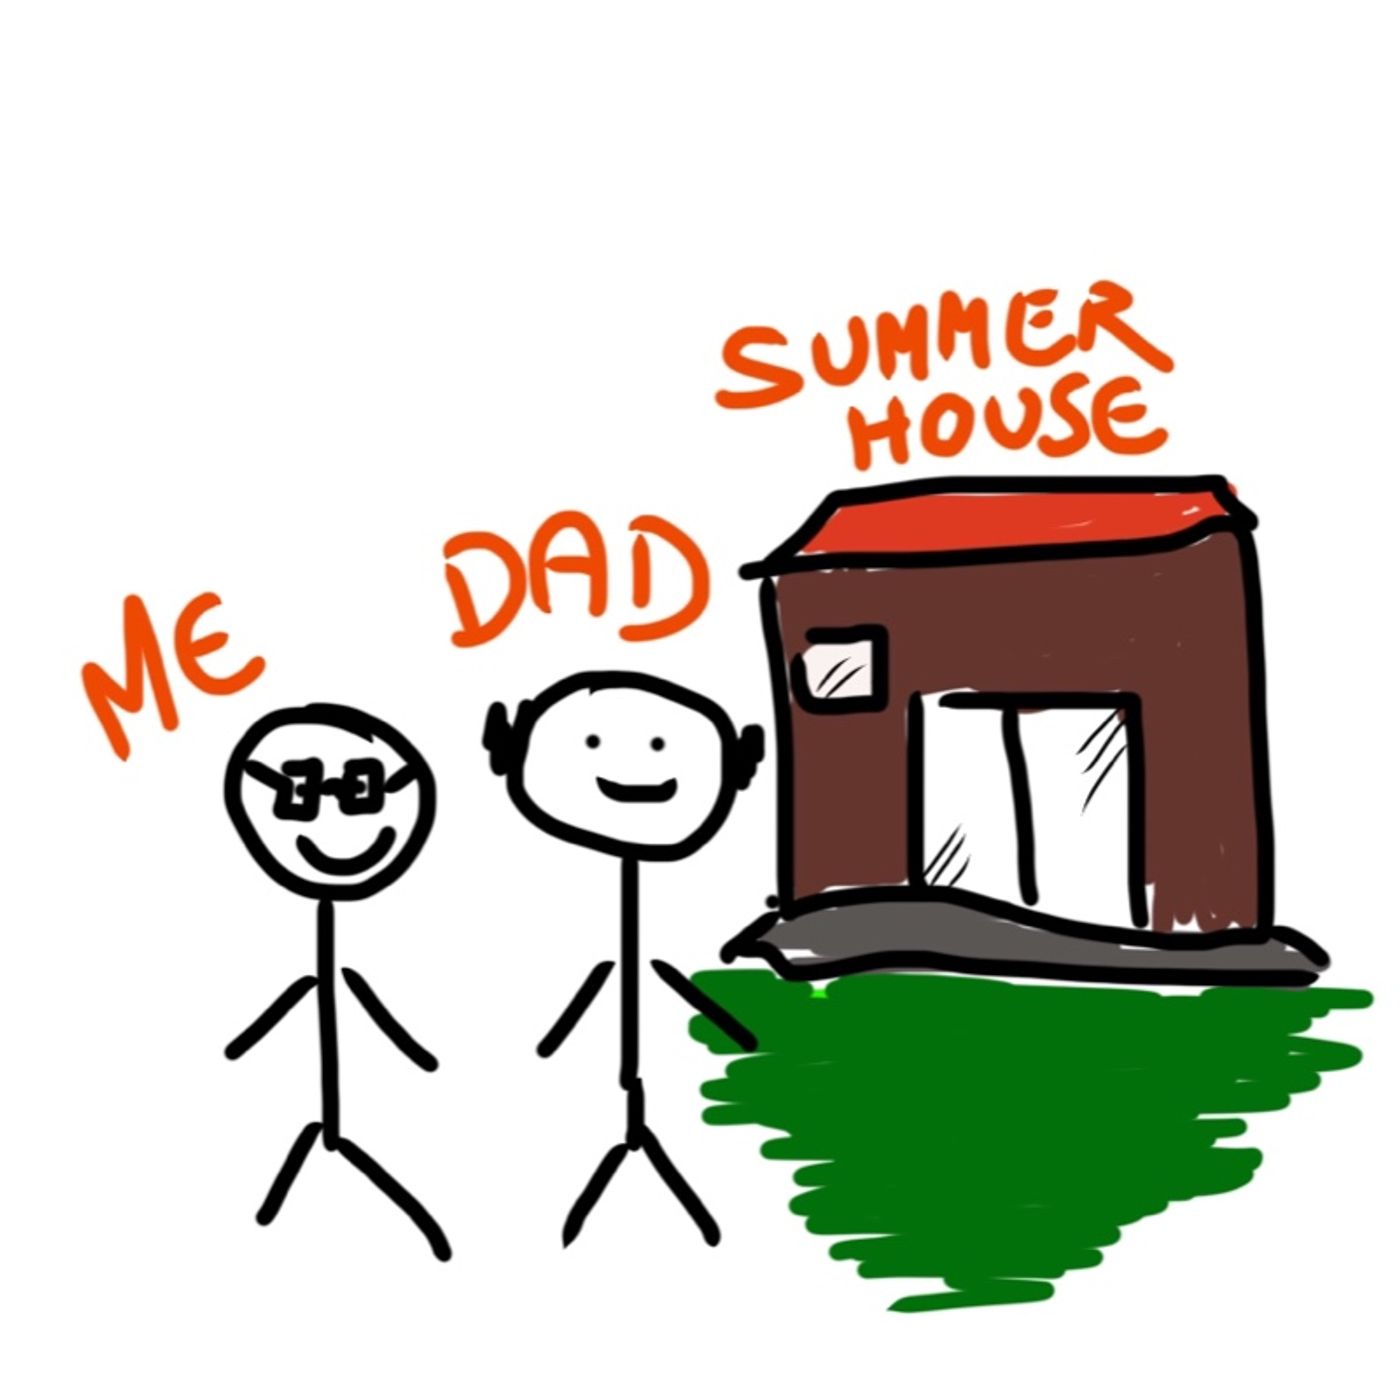 Me, my Dad and his Summerhouse